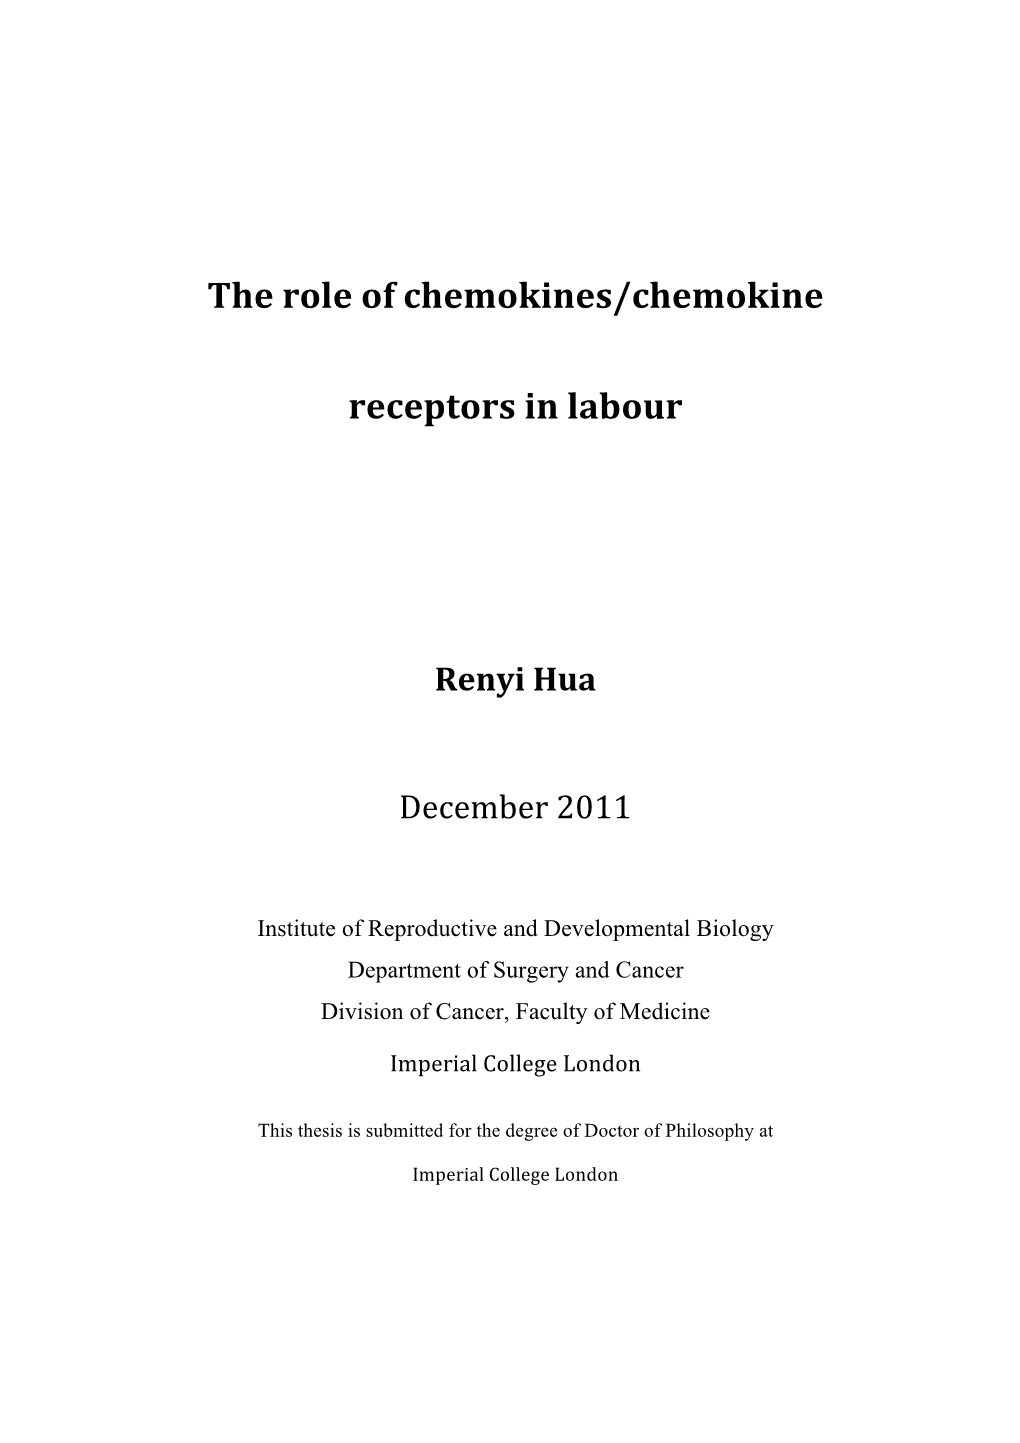 The Role of Chemokines/Chemokine Receptors in Labour